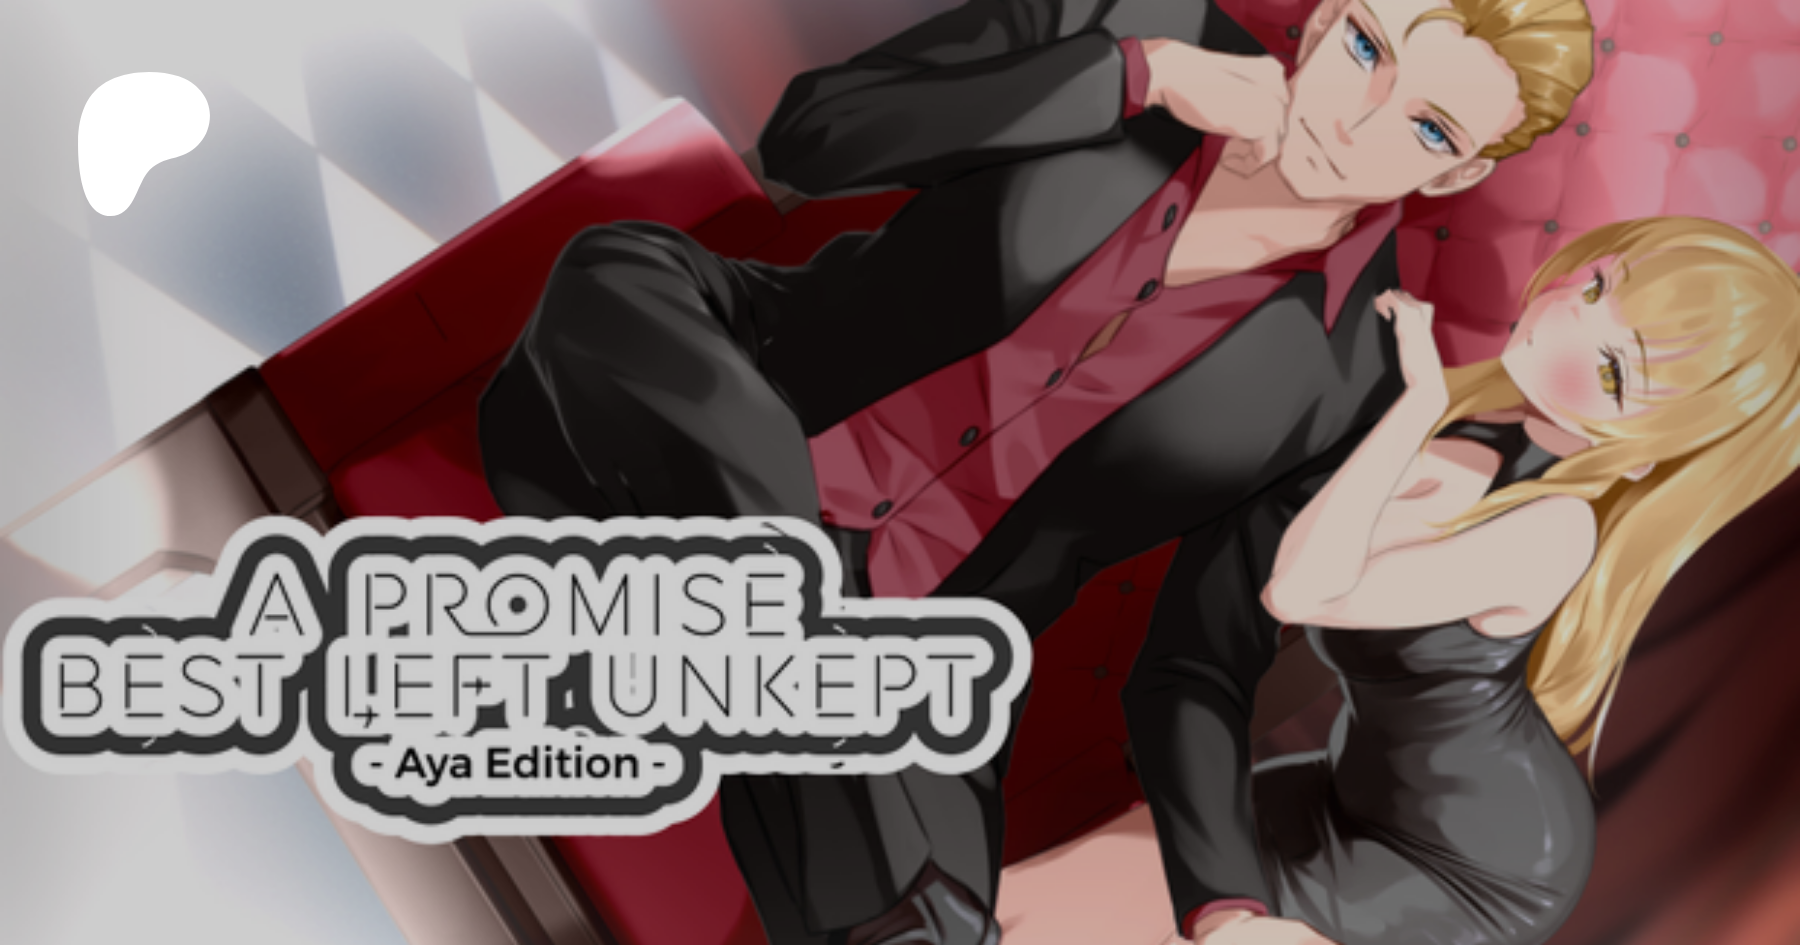 Cross promo] A Promise Best Left Unkept – Aya Edition is a NTR visual novel  created by HangoverCat! | Patreon